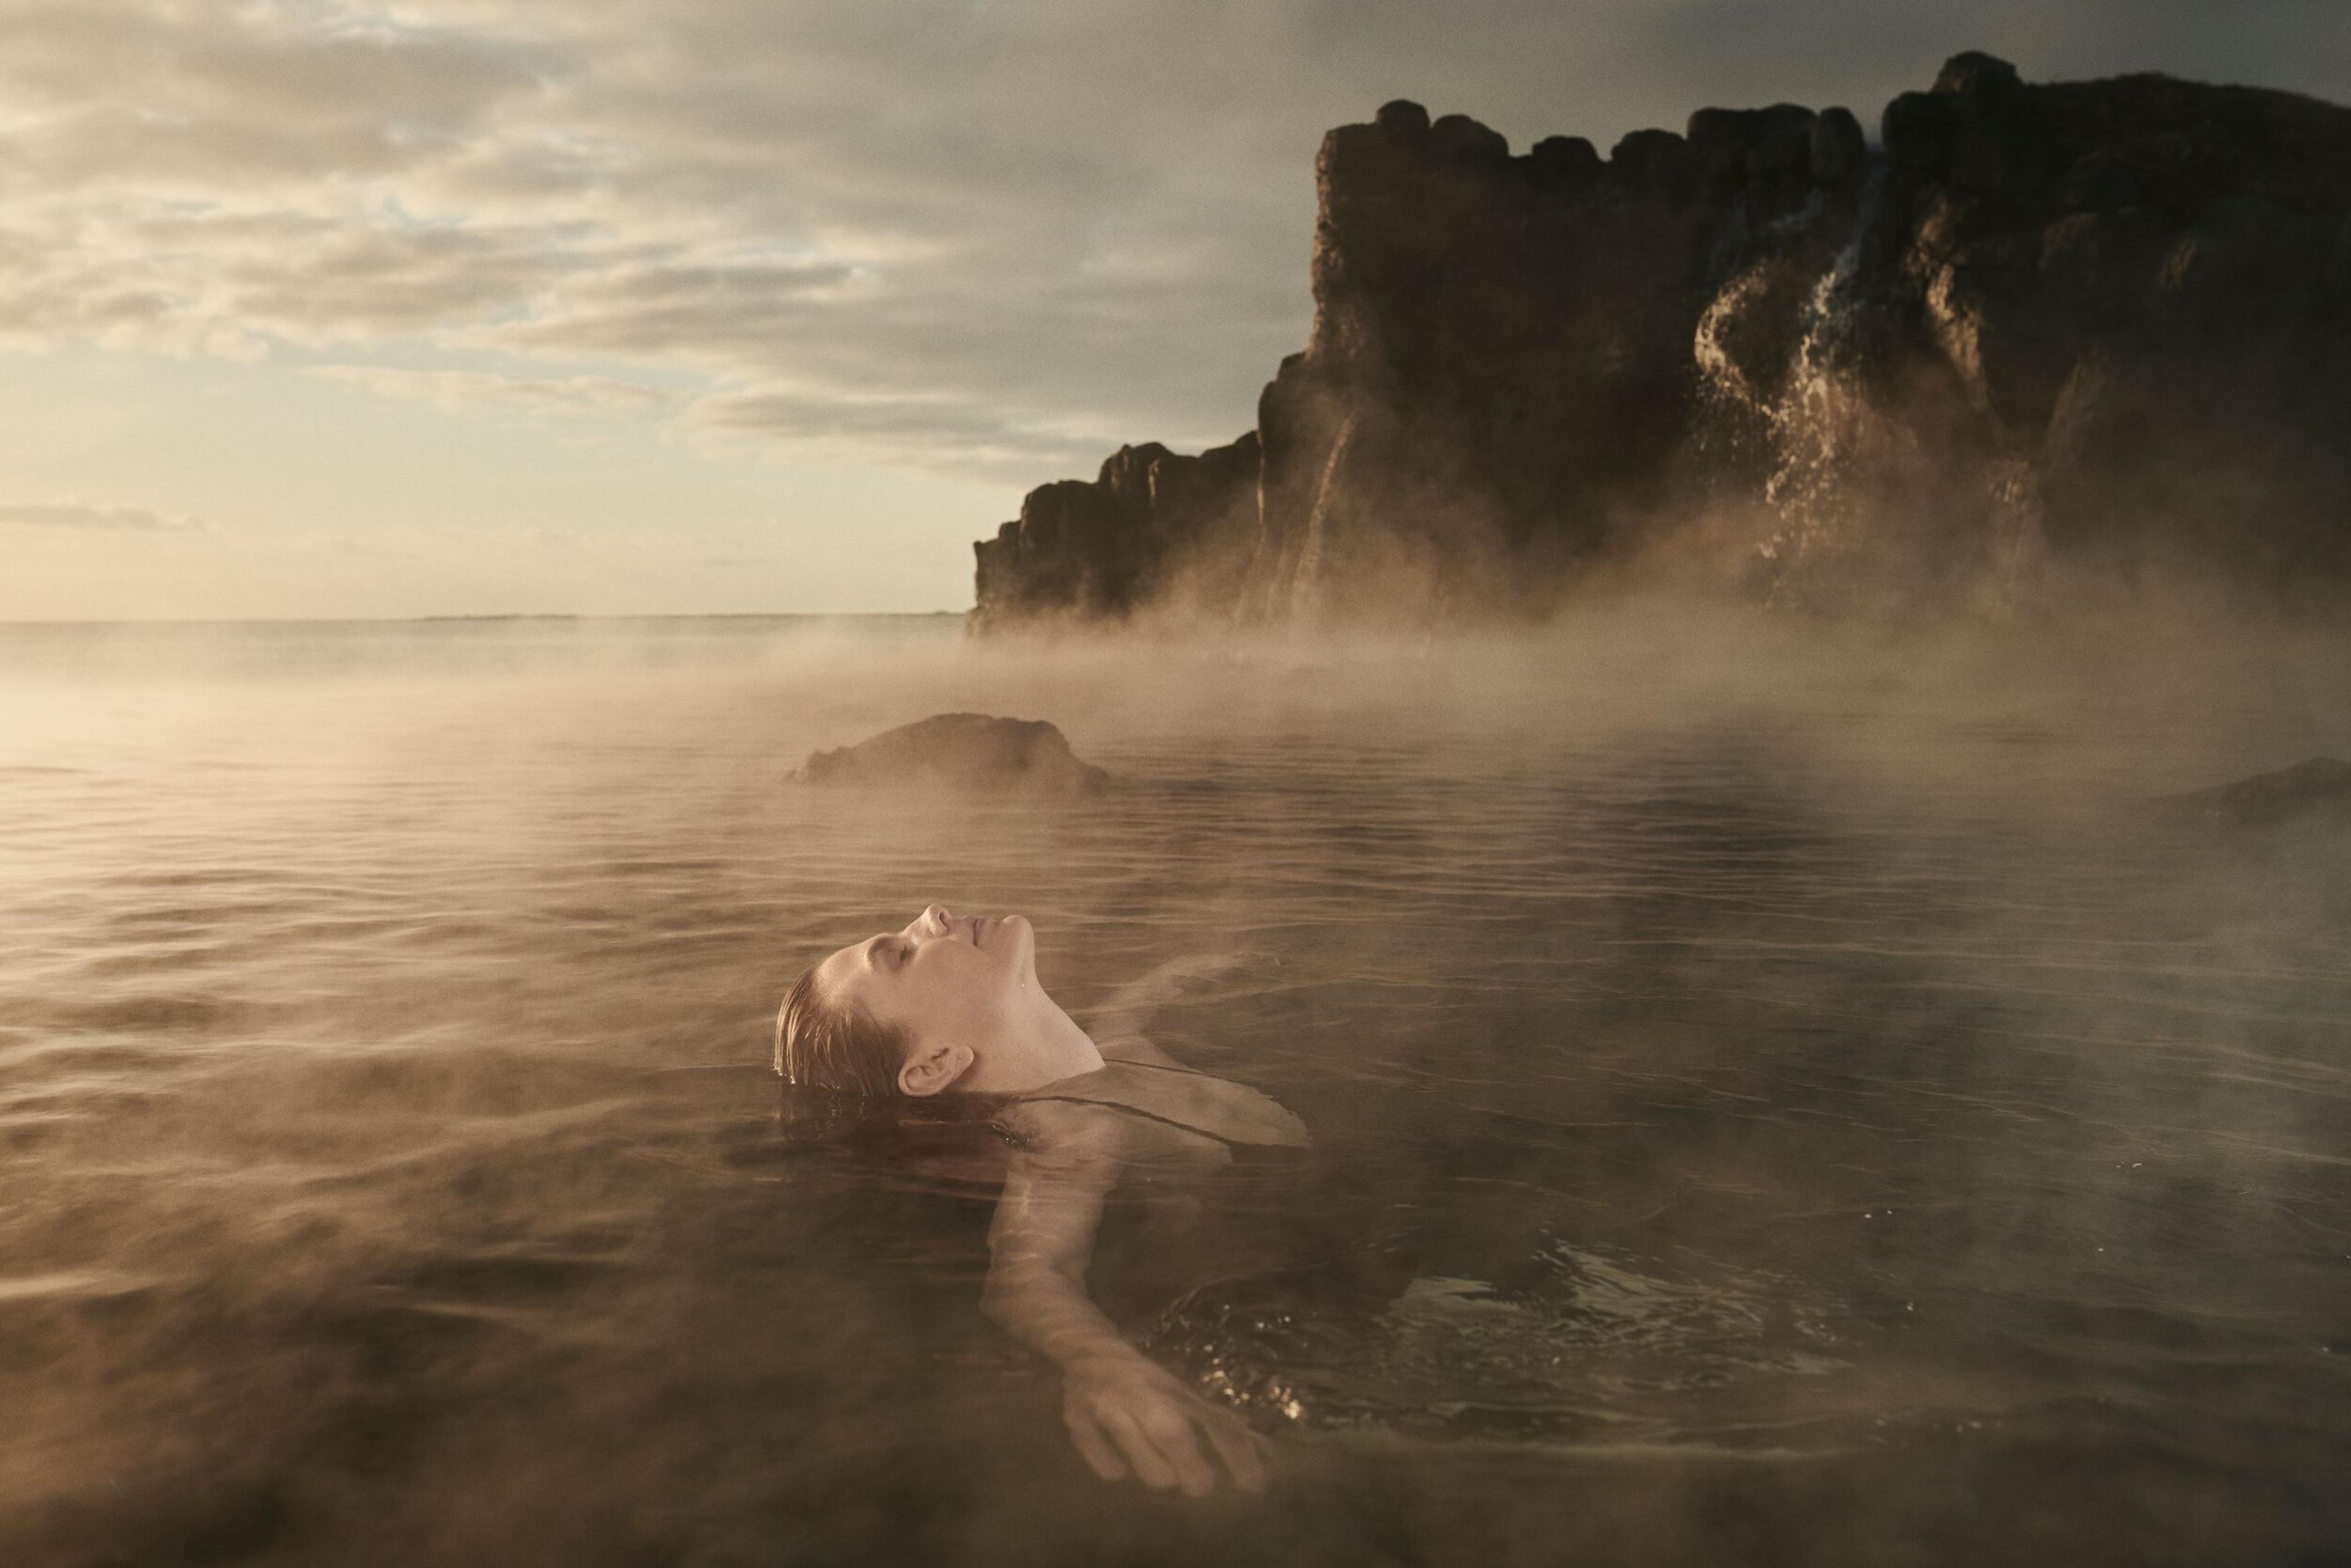 A woman serenely floating in warm waters, framed by towering cliffs, bathed in the golden hues of sunset.